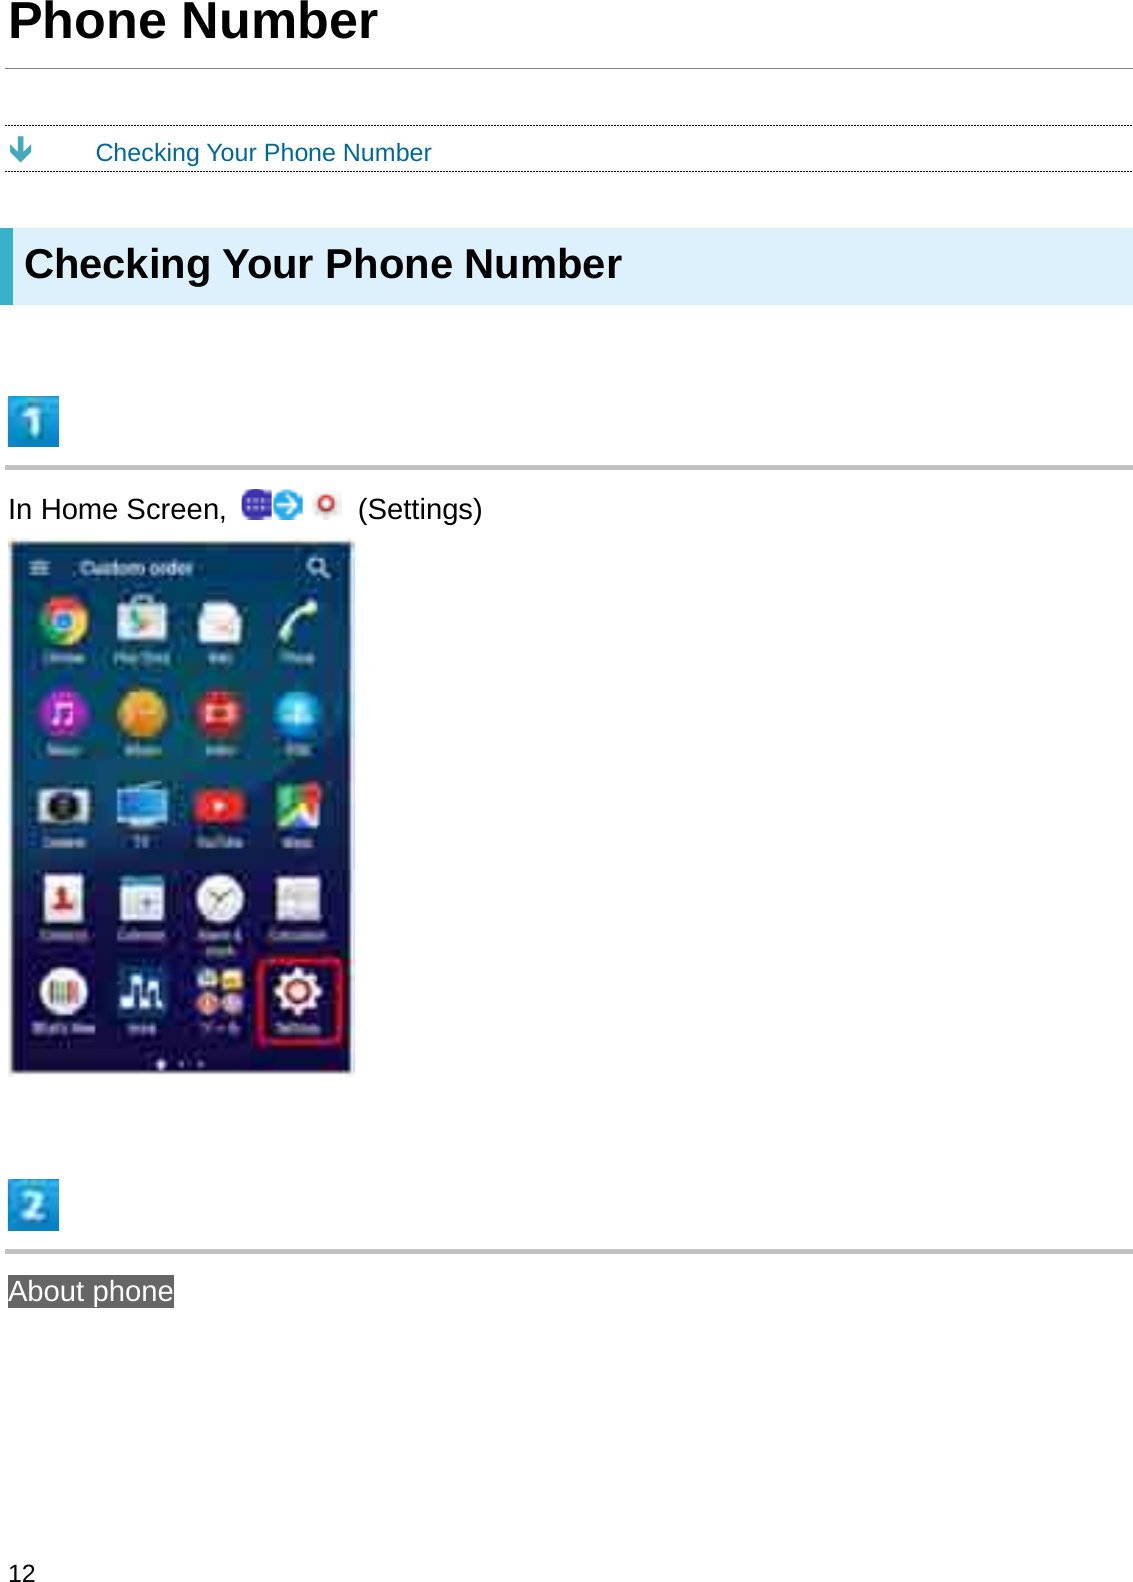 Phone NumberÐChecking Your Phone NumberChecking Your Phone NumberIn Home Screen,  (Settings)About phone12